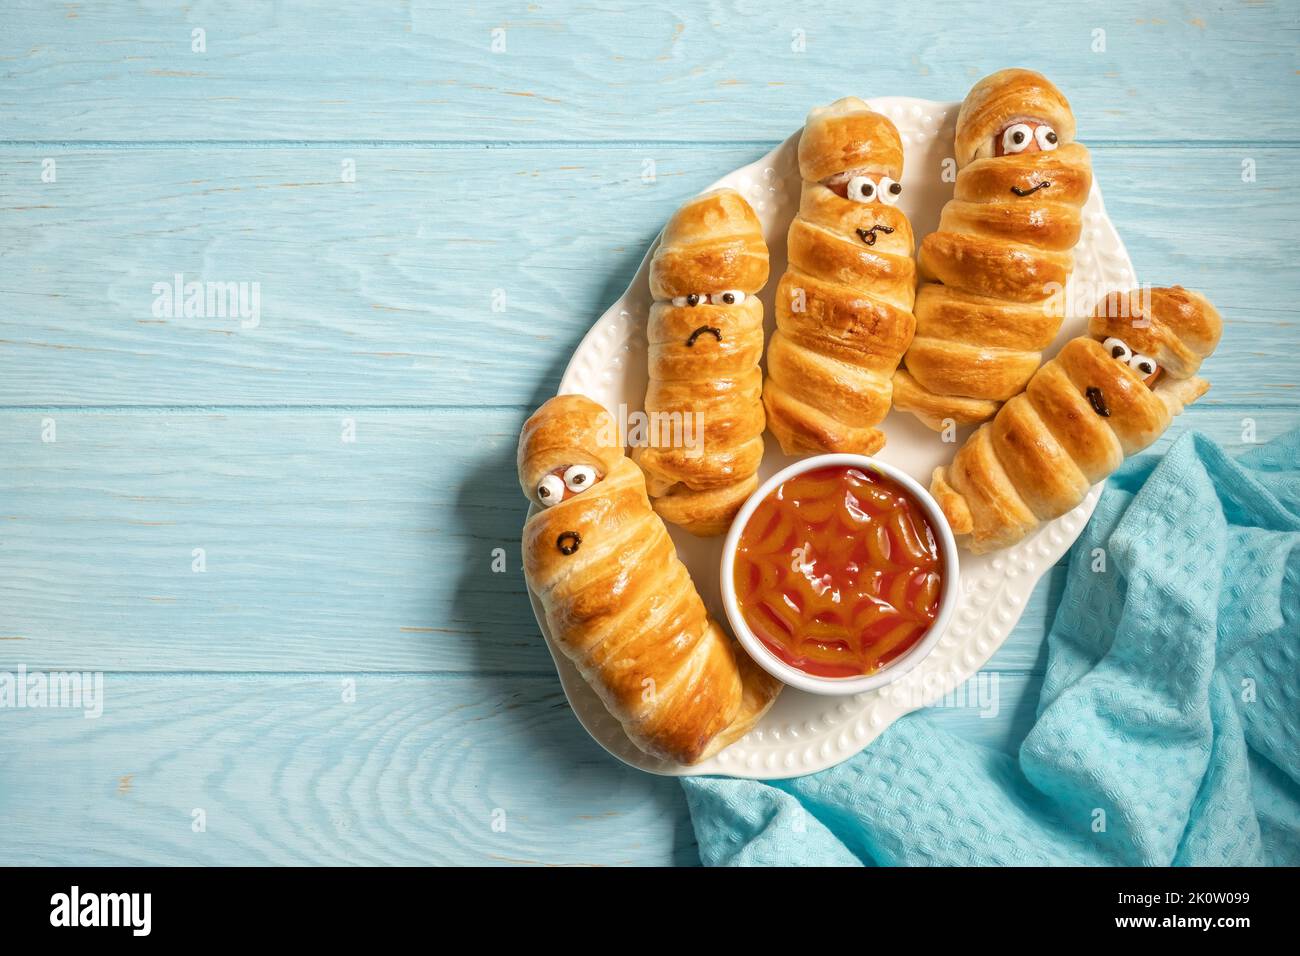 Mummy sausages scary halloween party food decoration wrapped in dough Stock Photo